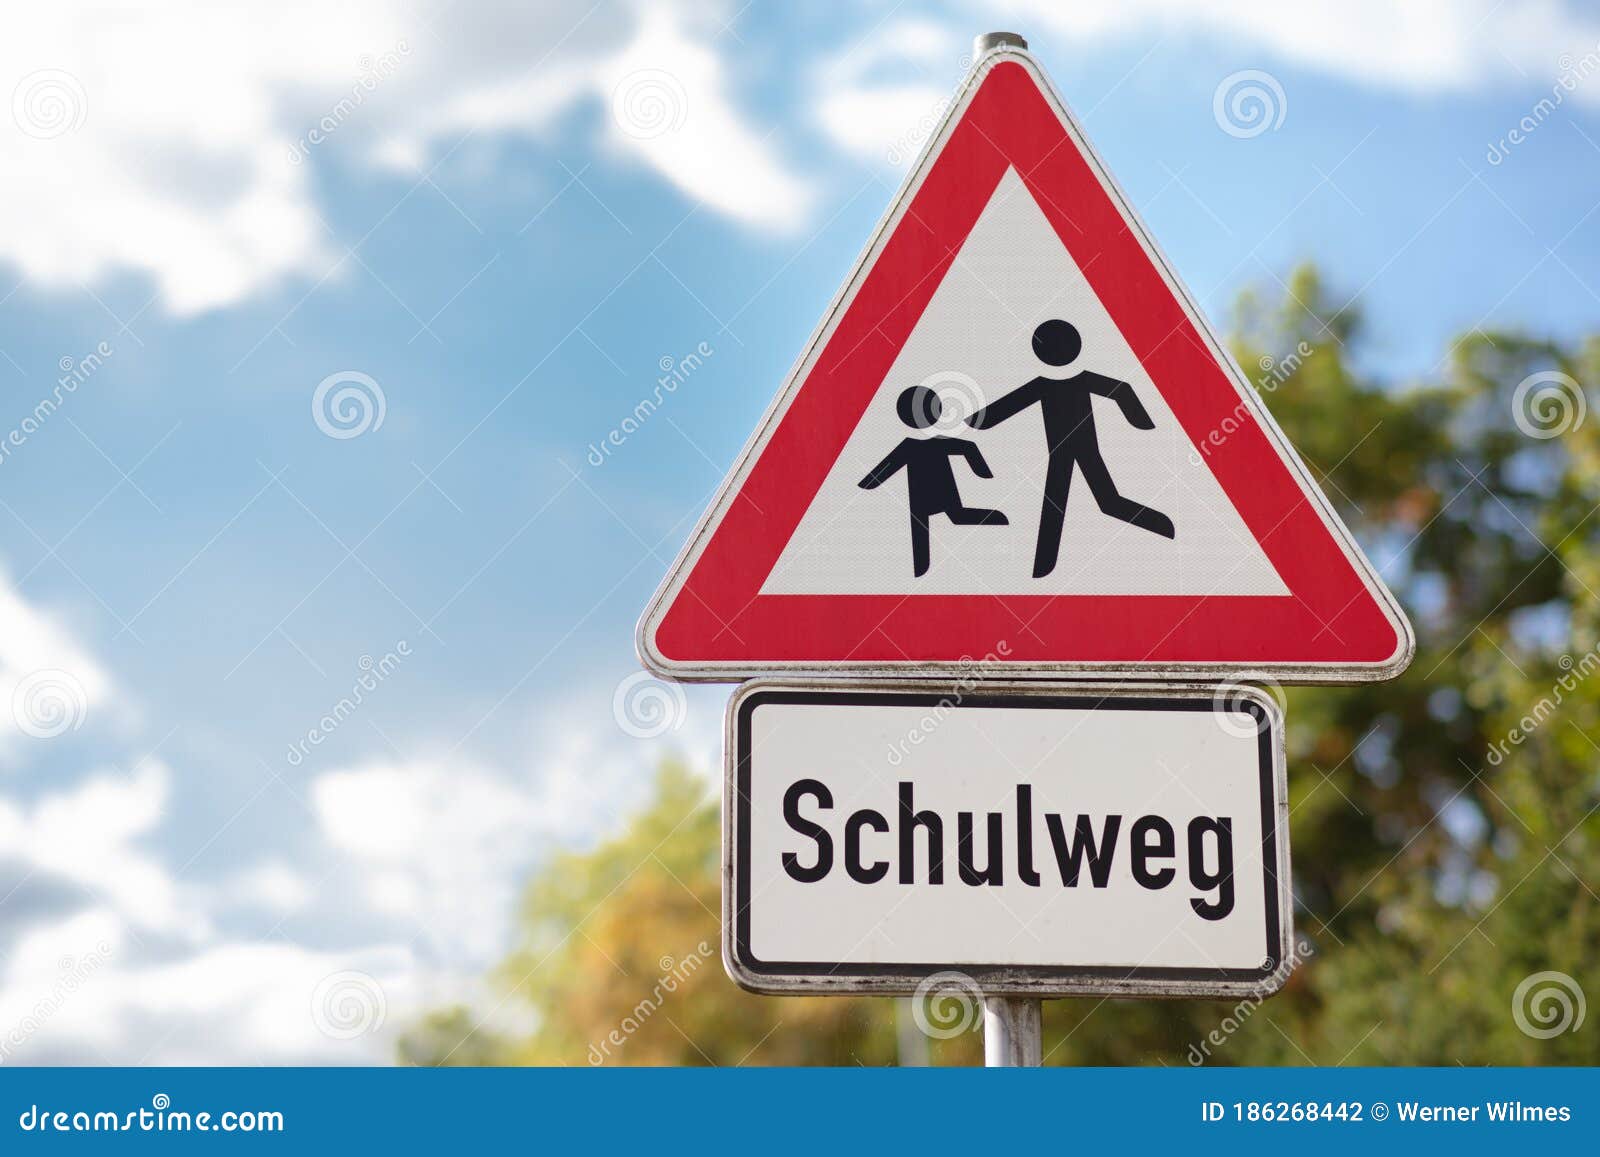 A Triangular Warning Sign Attention Children On The Way To School Stock Photo Image Of Pedestrian Copy 186268442